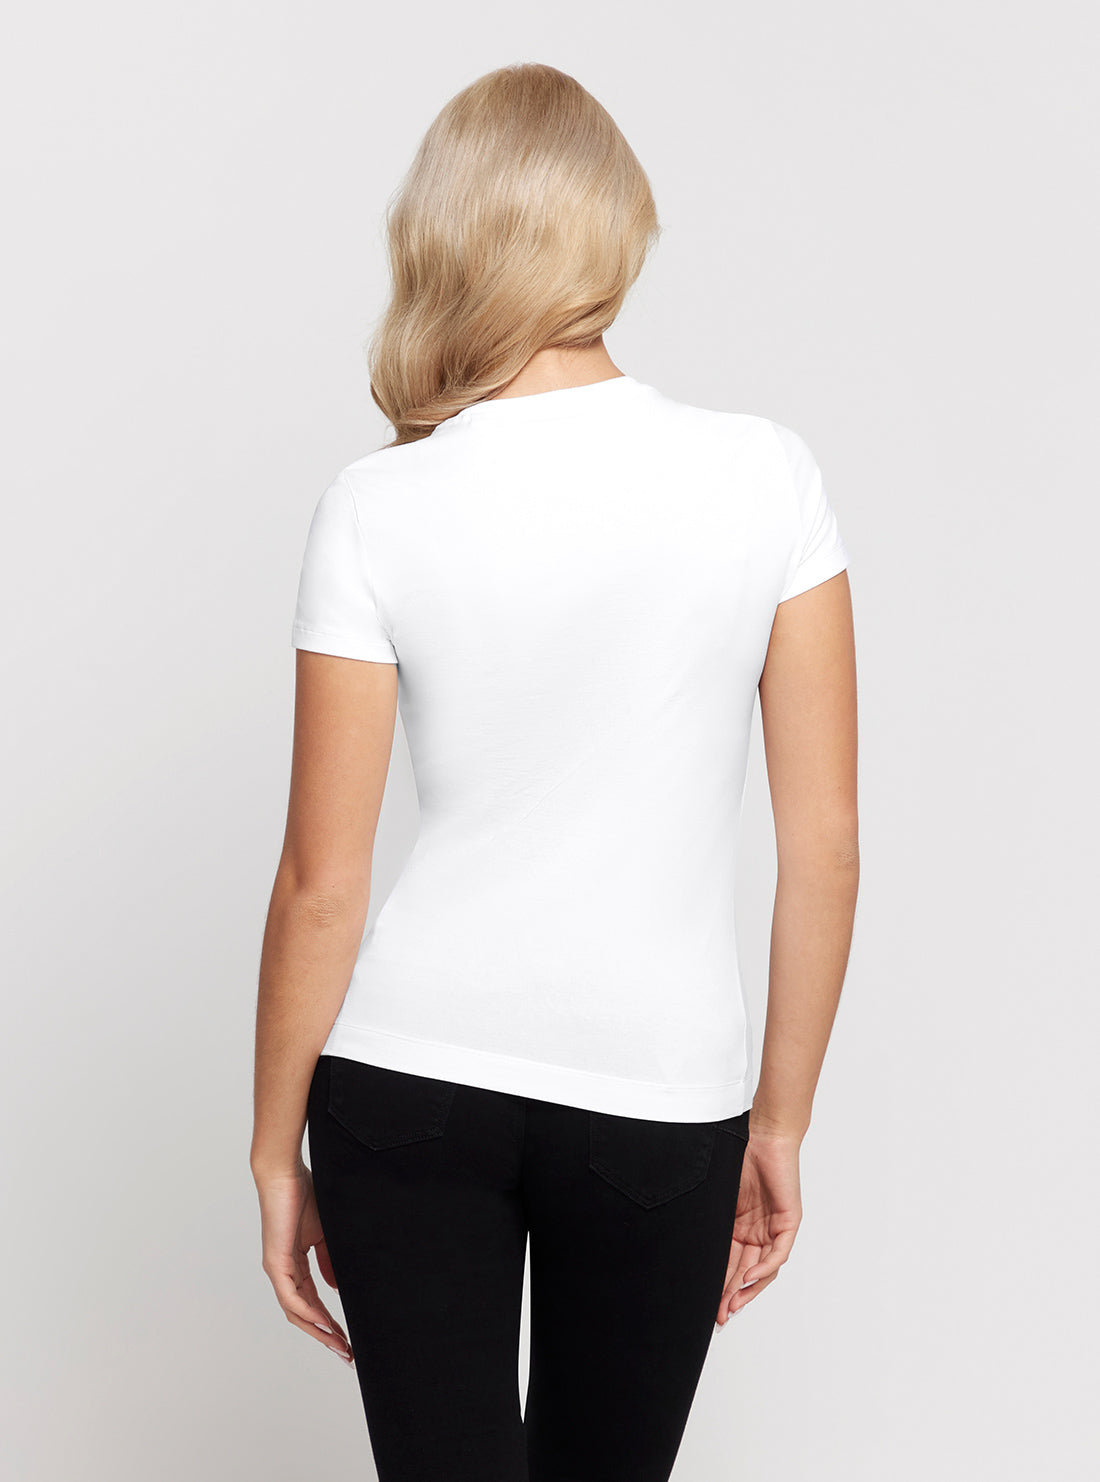 GUESS White Short Sleeve Stones Logo T-Shirt back view